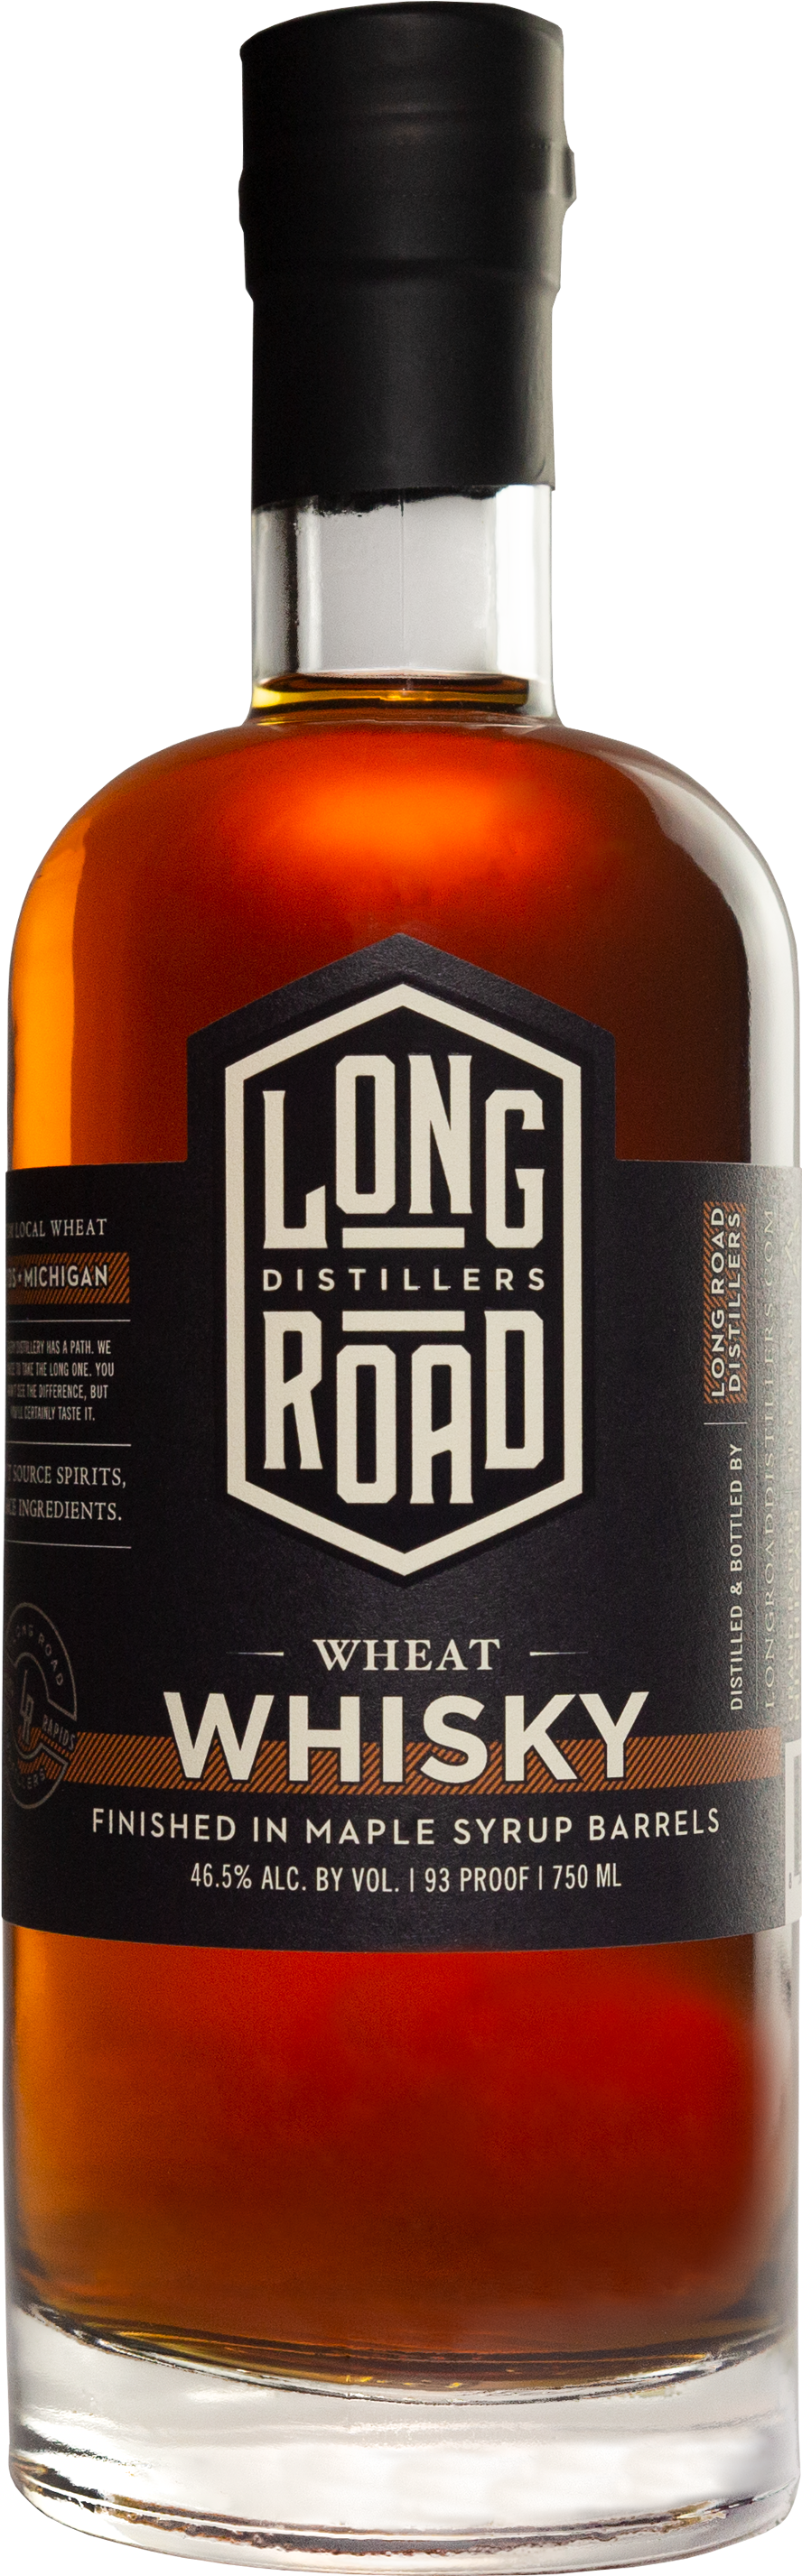 Long Road Distillers Wheat Whisky Bottle PNG